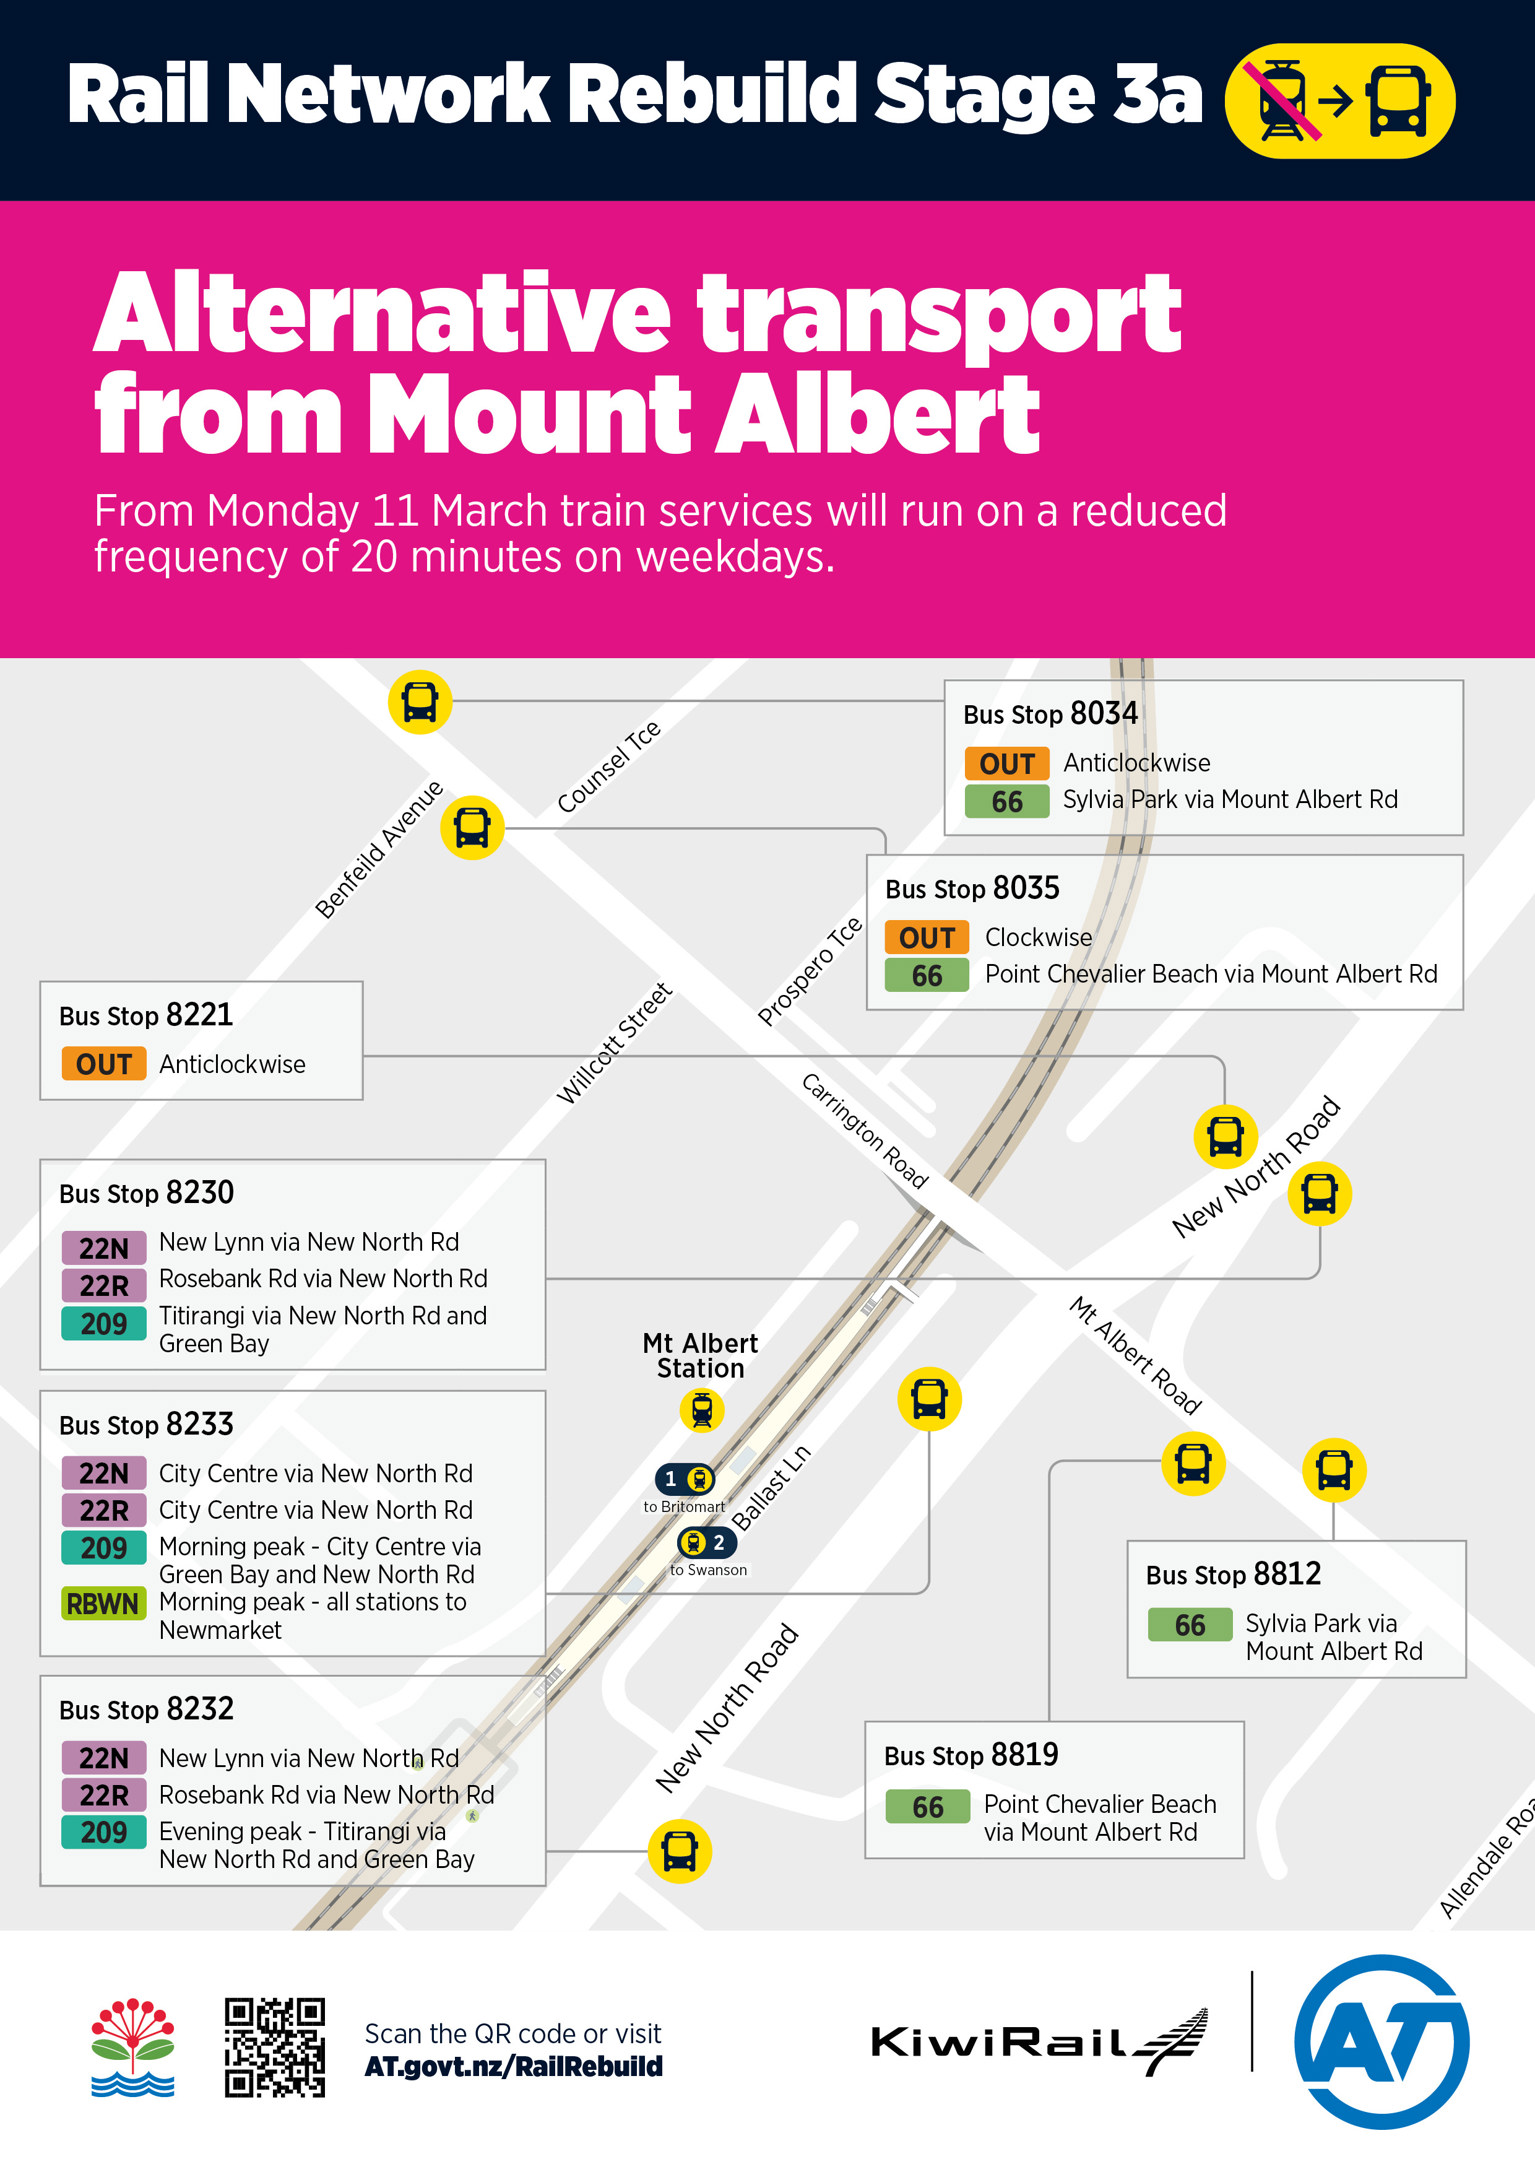 Poster showing alternative transport options from Mount Albert Station during Stage 3 of the Rail Network Rebuild